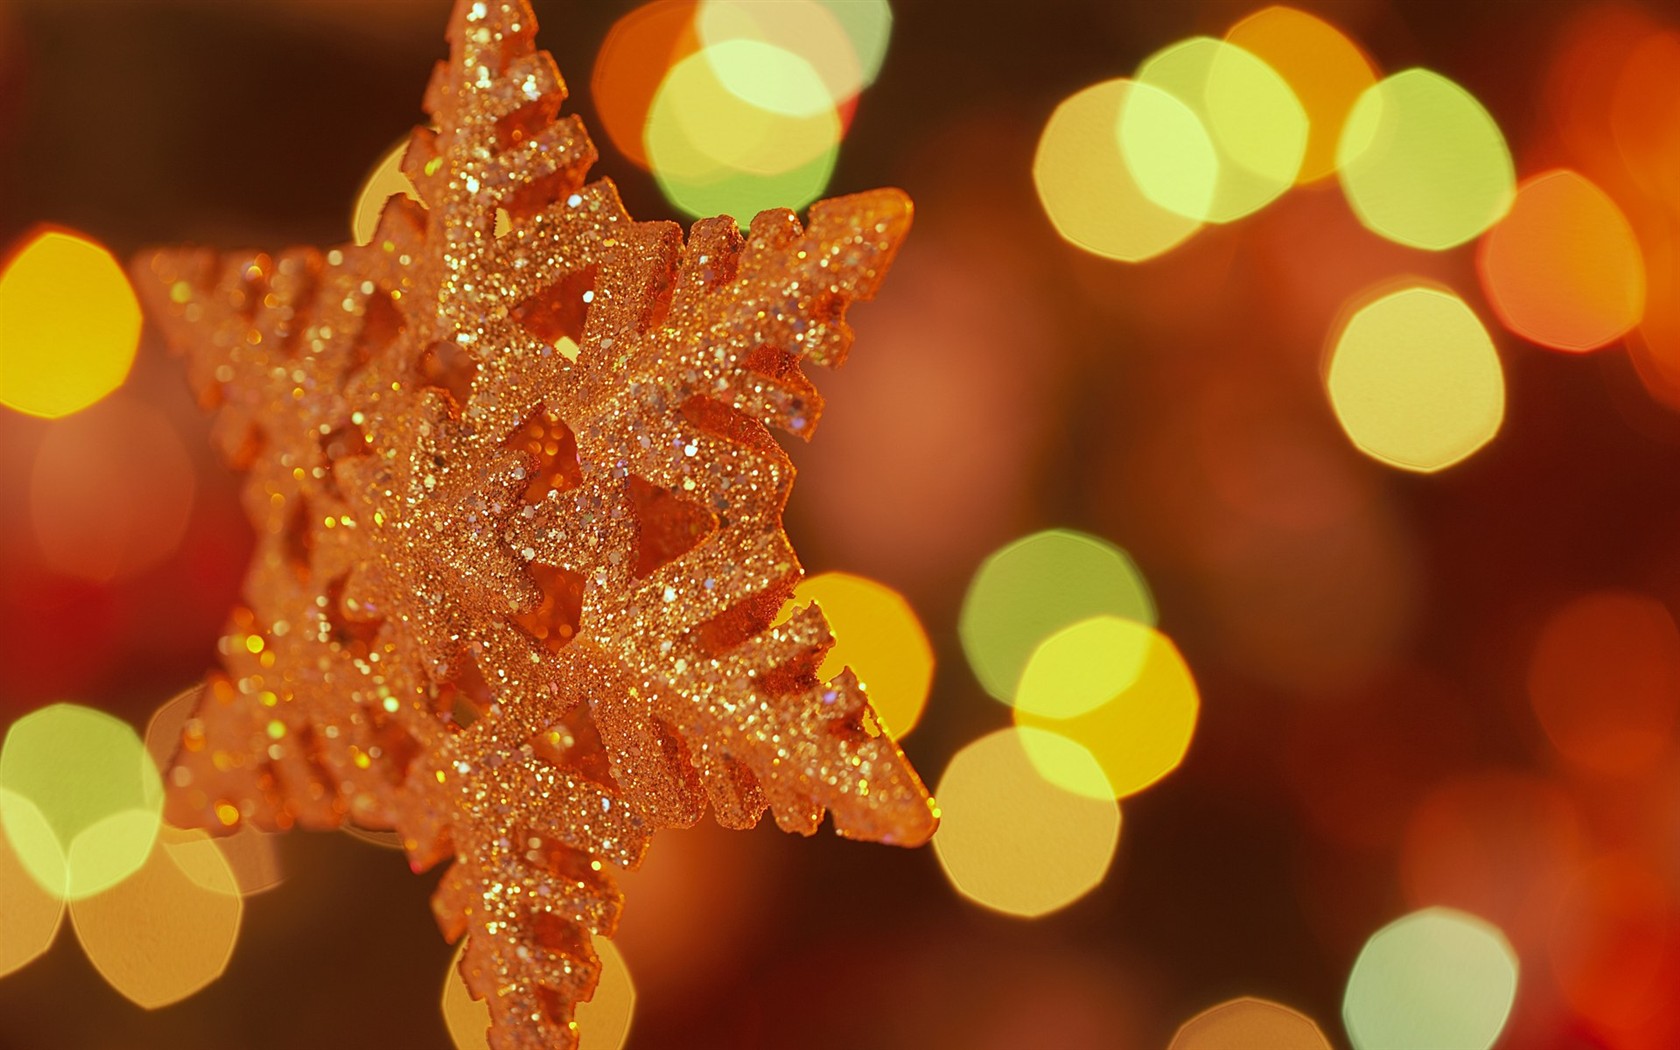 Happy Christmas decorations wallpapers #1 - 1680x1050